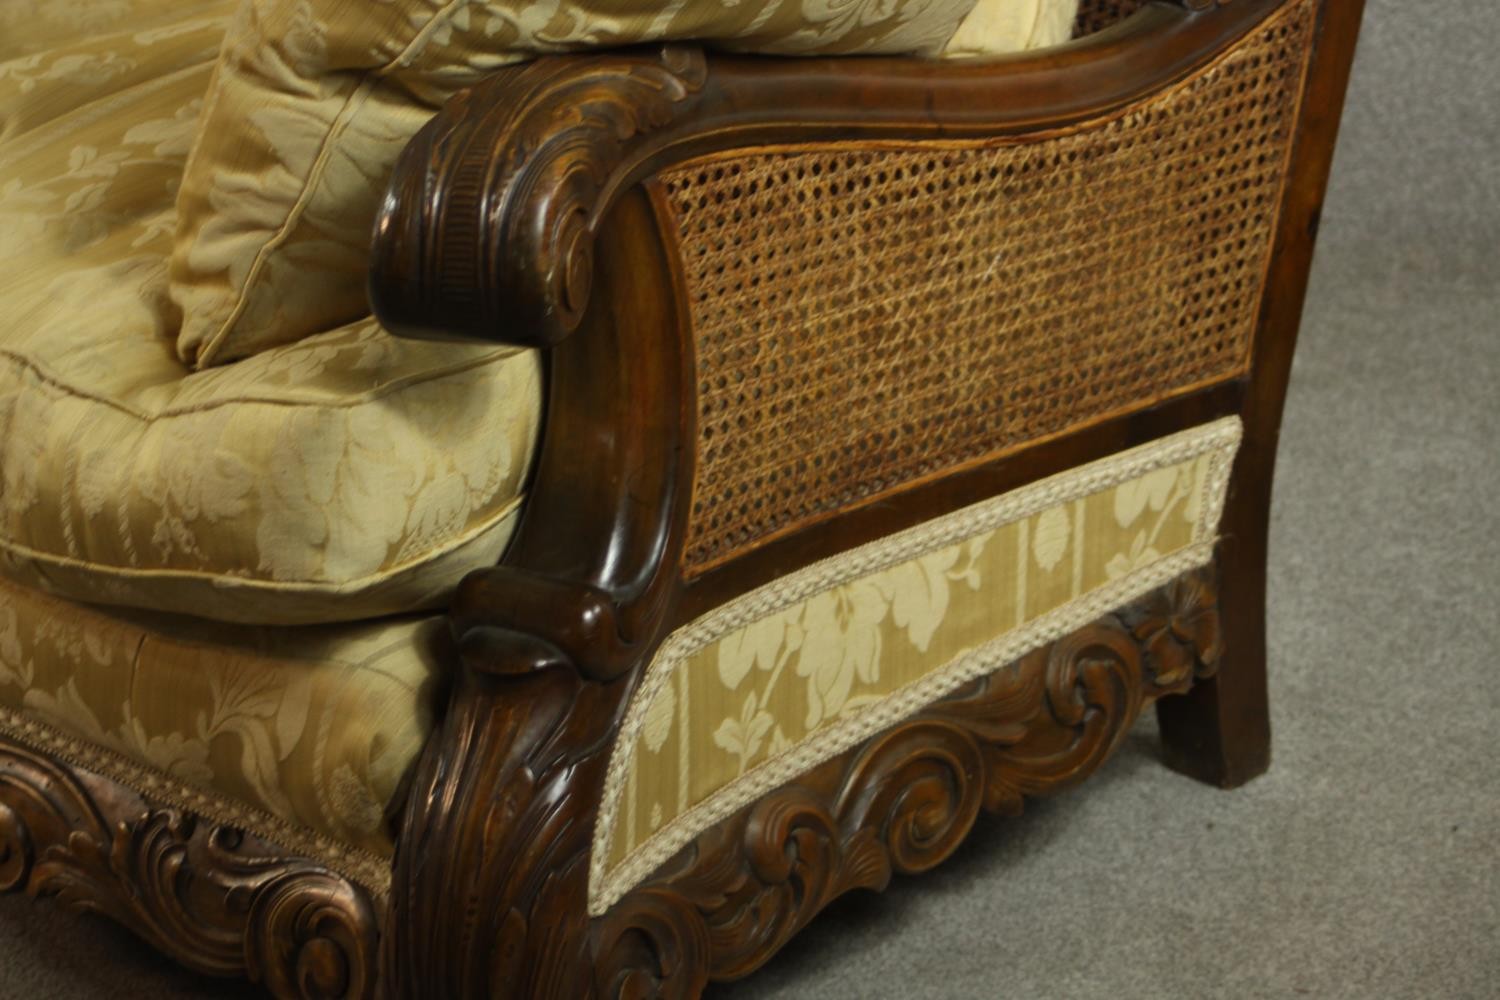 An early 20th century Continental carved walnut three seater bergere sofa, upholstered in gold - Image 10 of 18